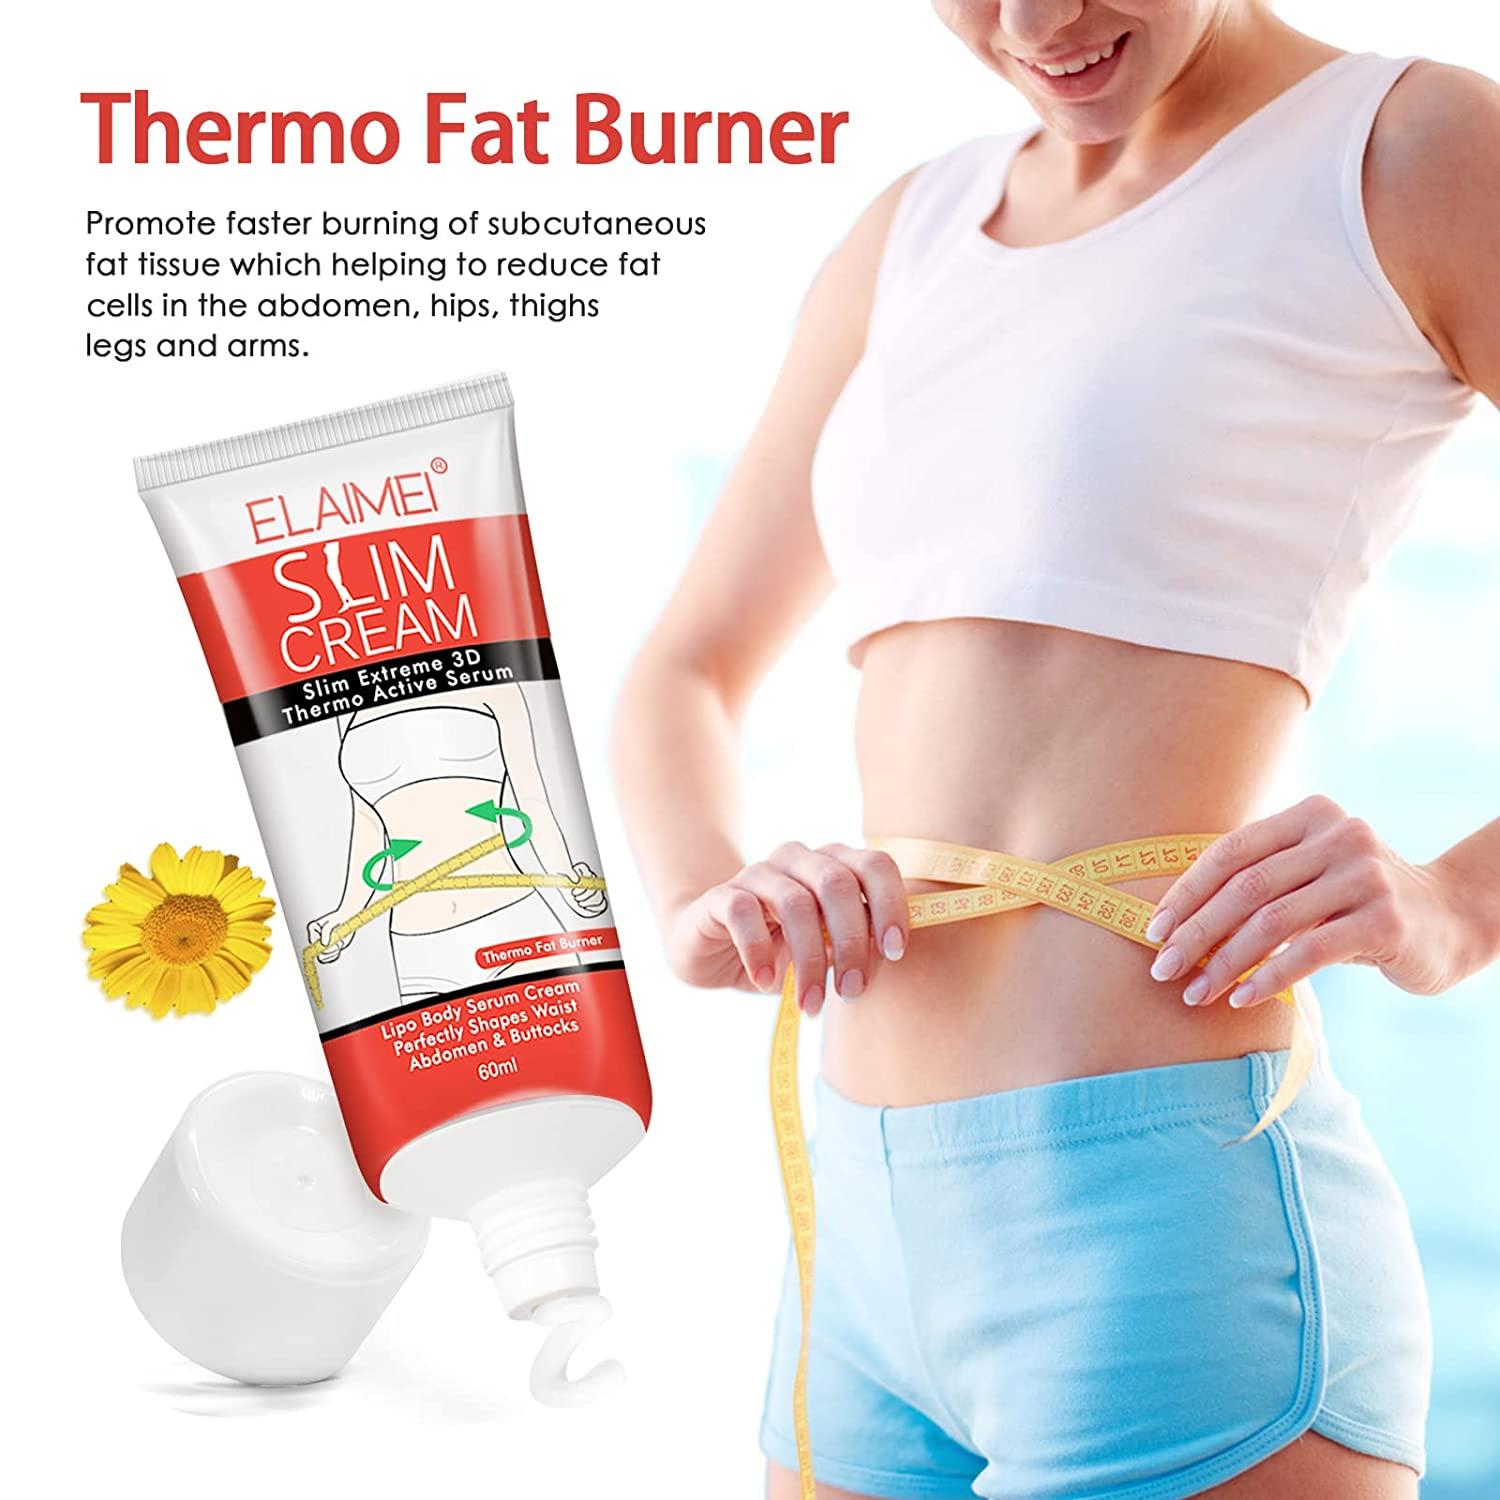 Slimming Hot Cream 2 Pack, Hot Cream for Belly Fat, Fat Burning Cream,  Anti-Cellulite Slim Massage Cream - Slimming Cream for Waist, Belly,  Buttocks and Thighs, Loose Weight Fast for Women